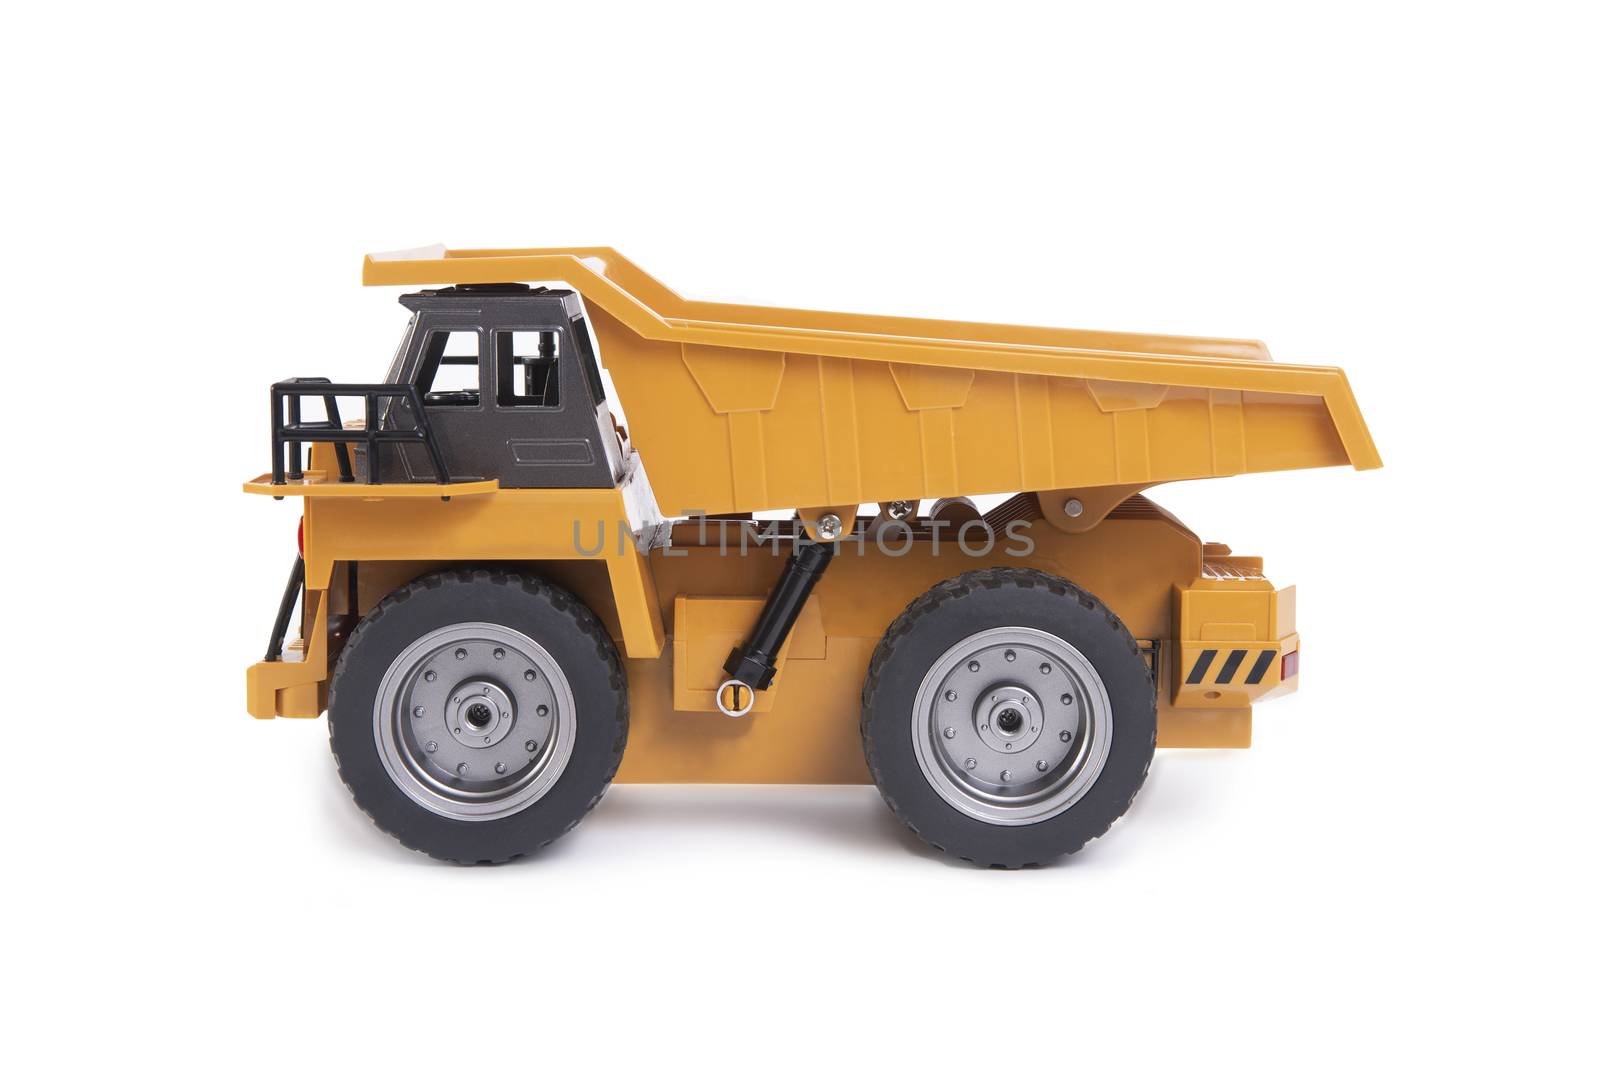 Yellow truck toy model on white background. by pandpstock_002